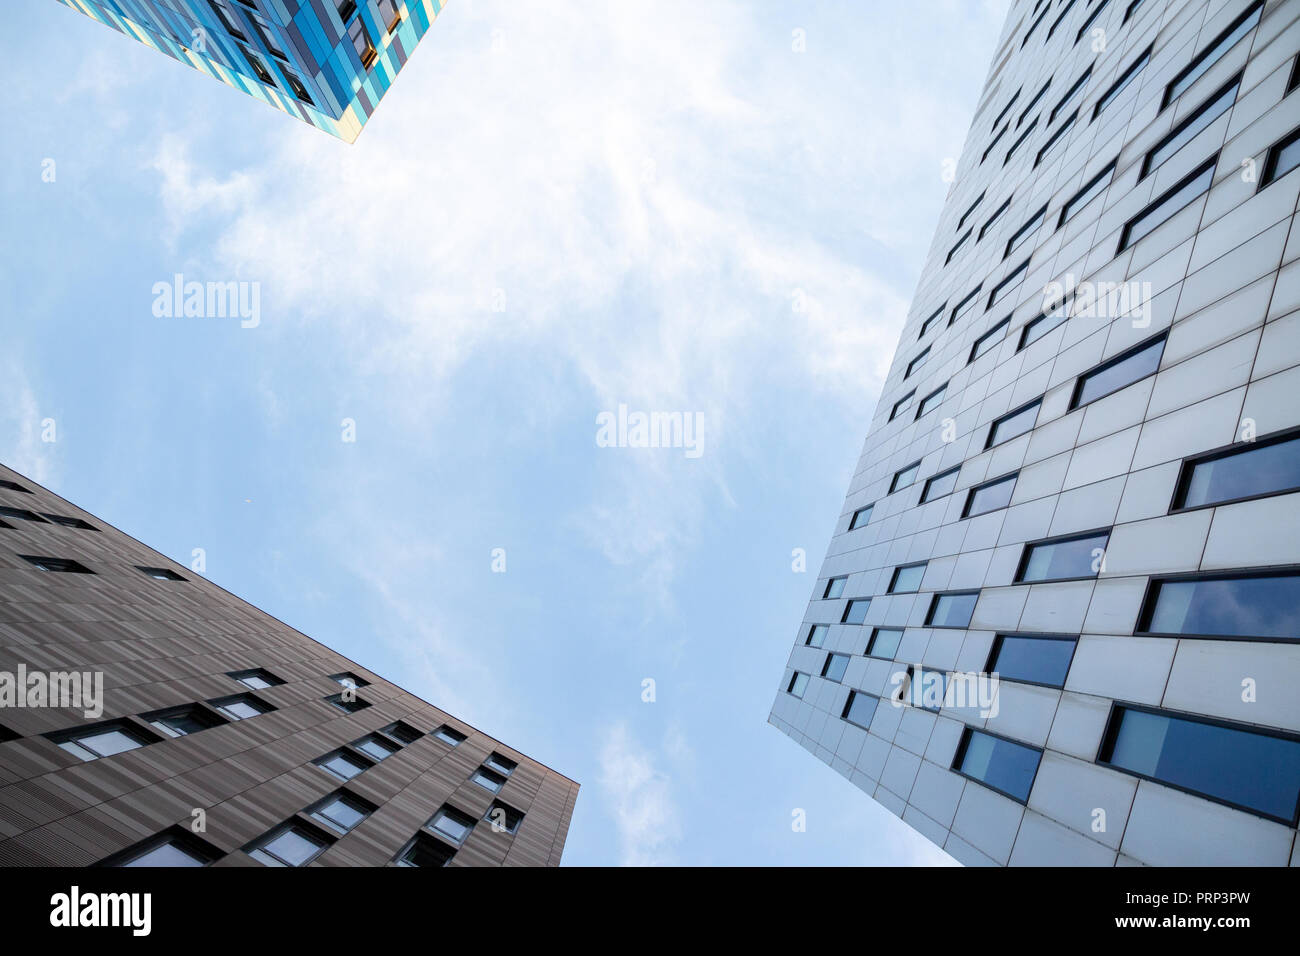 Looking up at blue sky with tall buildings framing the shot Stock Photo